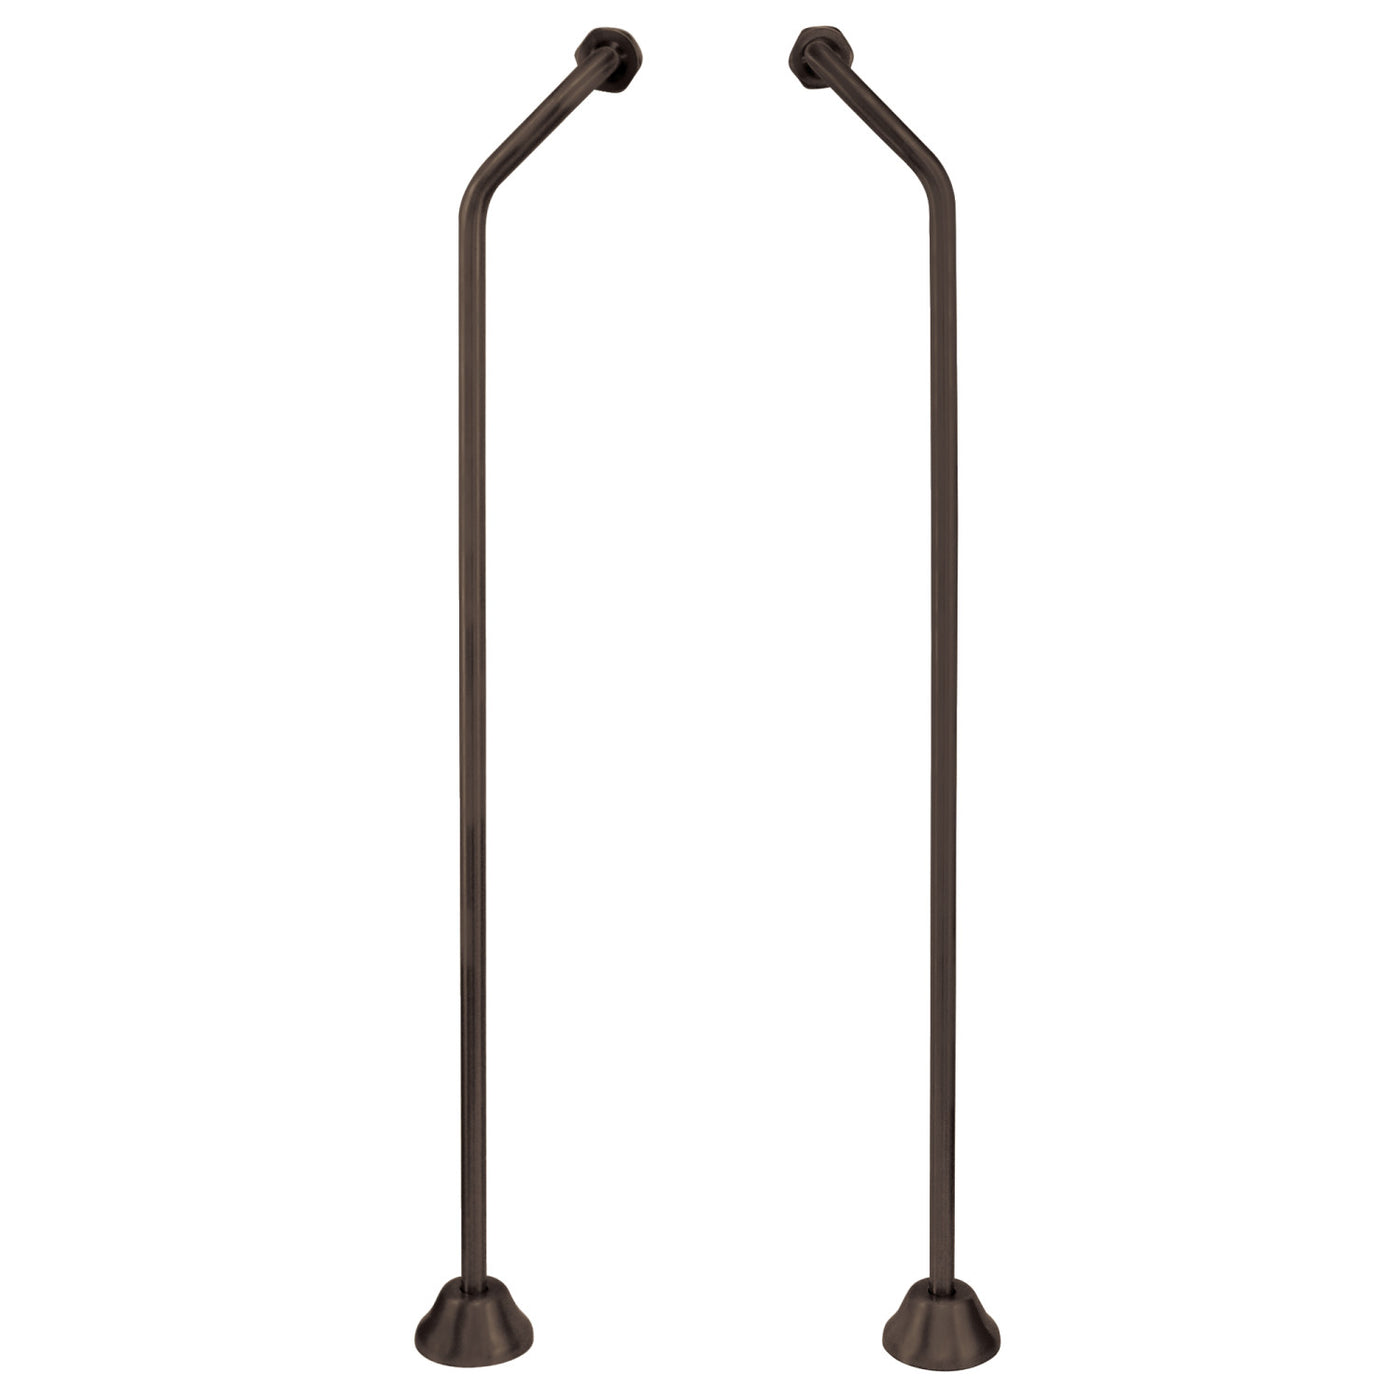 Elements of Design DS475 Double Offset Bath Supply, Oil Rubbed Bronze